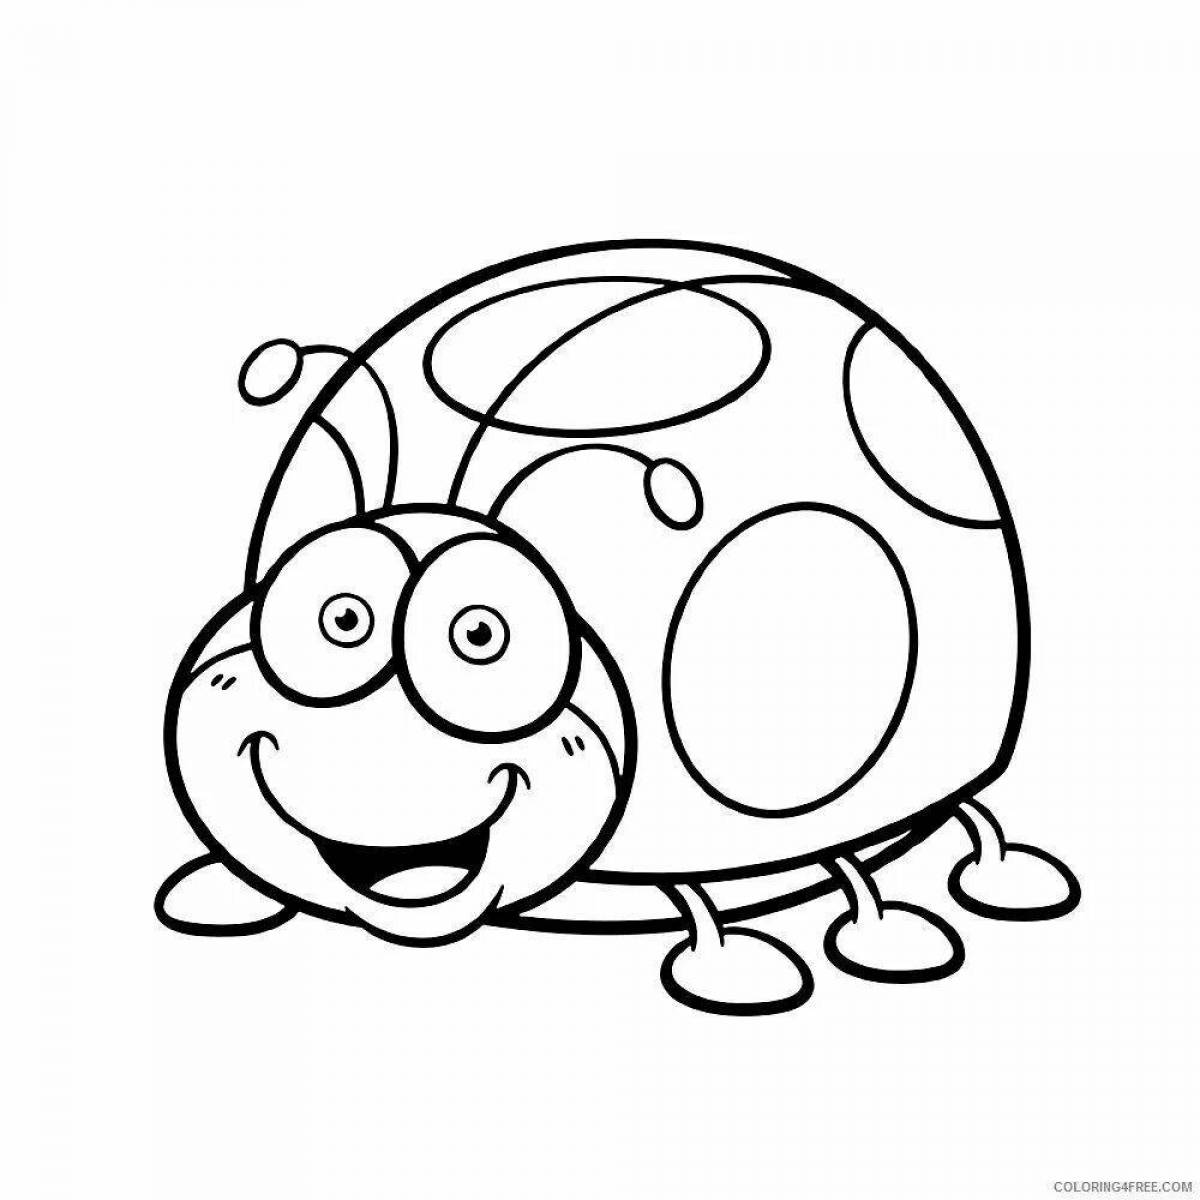 Animated cute cow coloring page